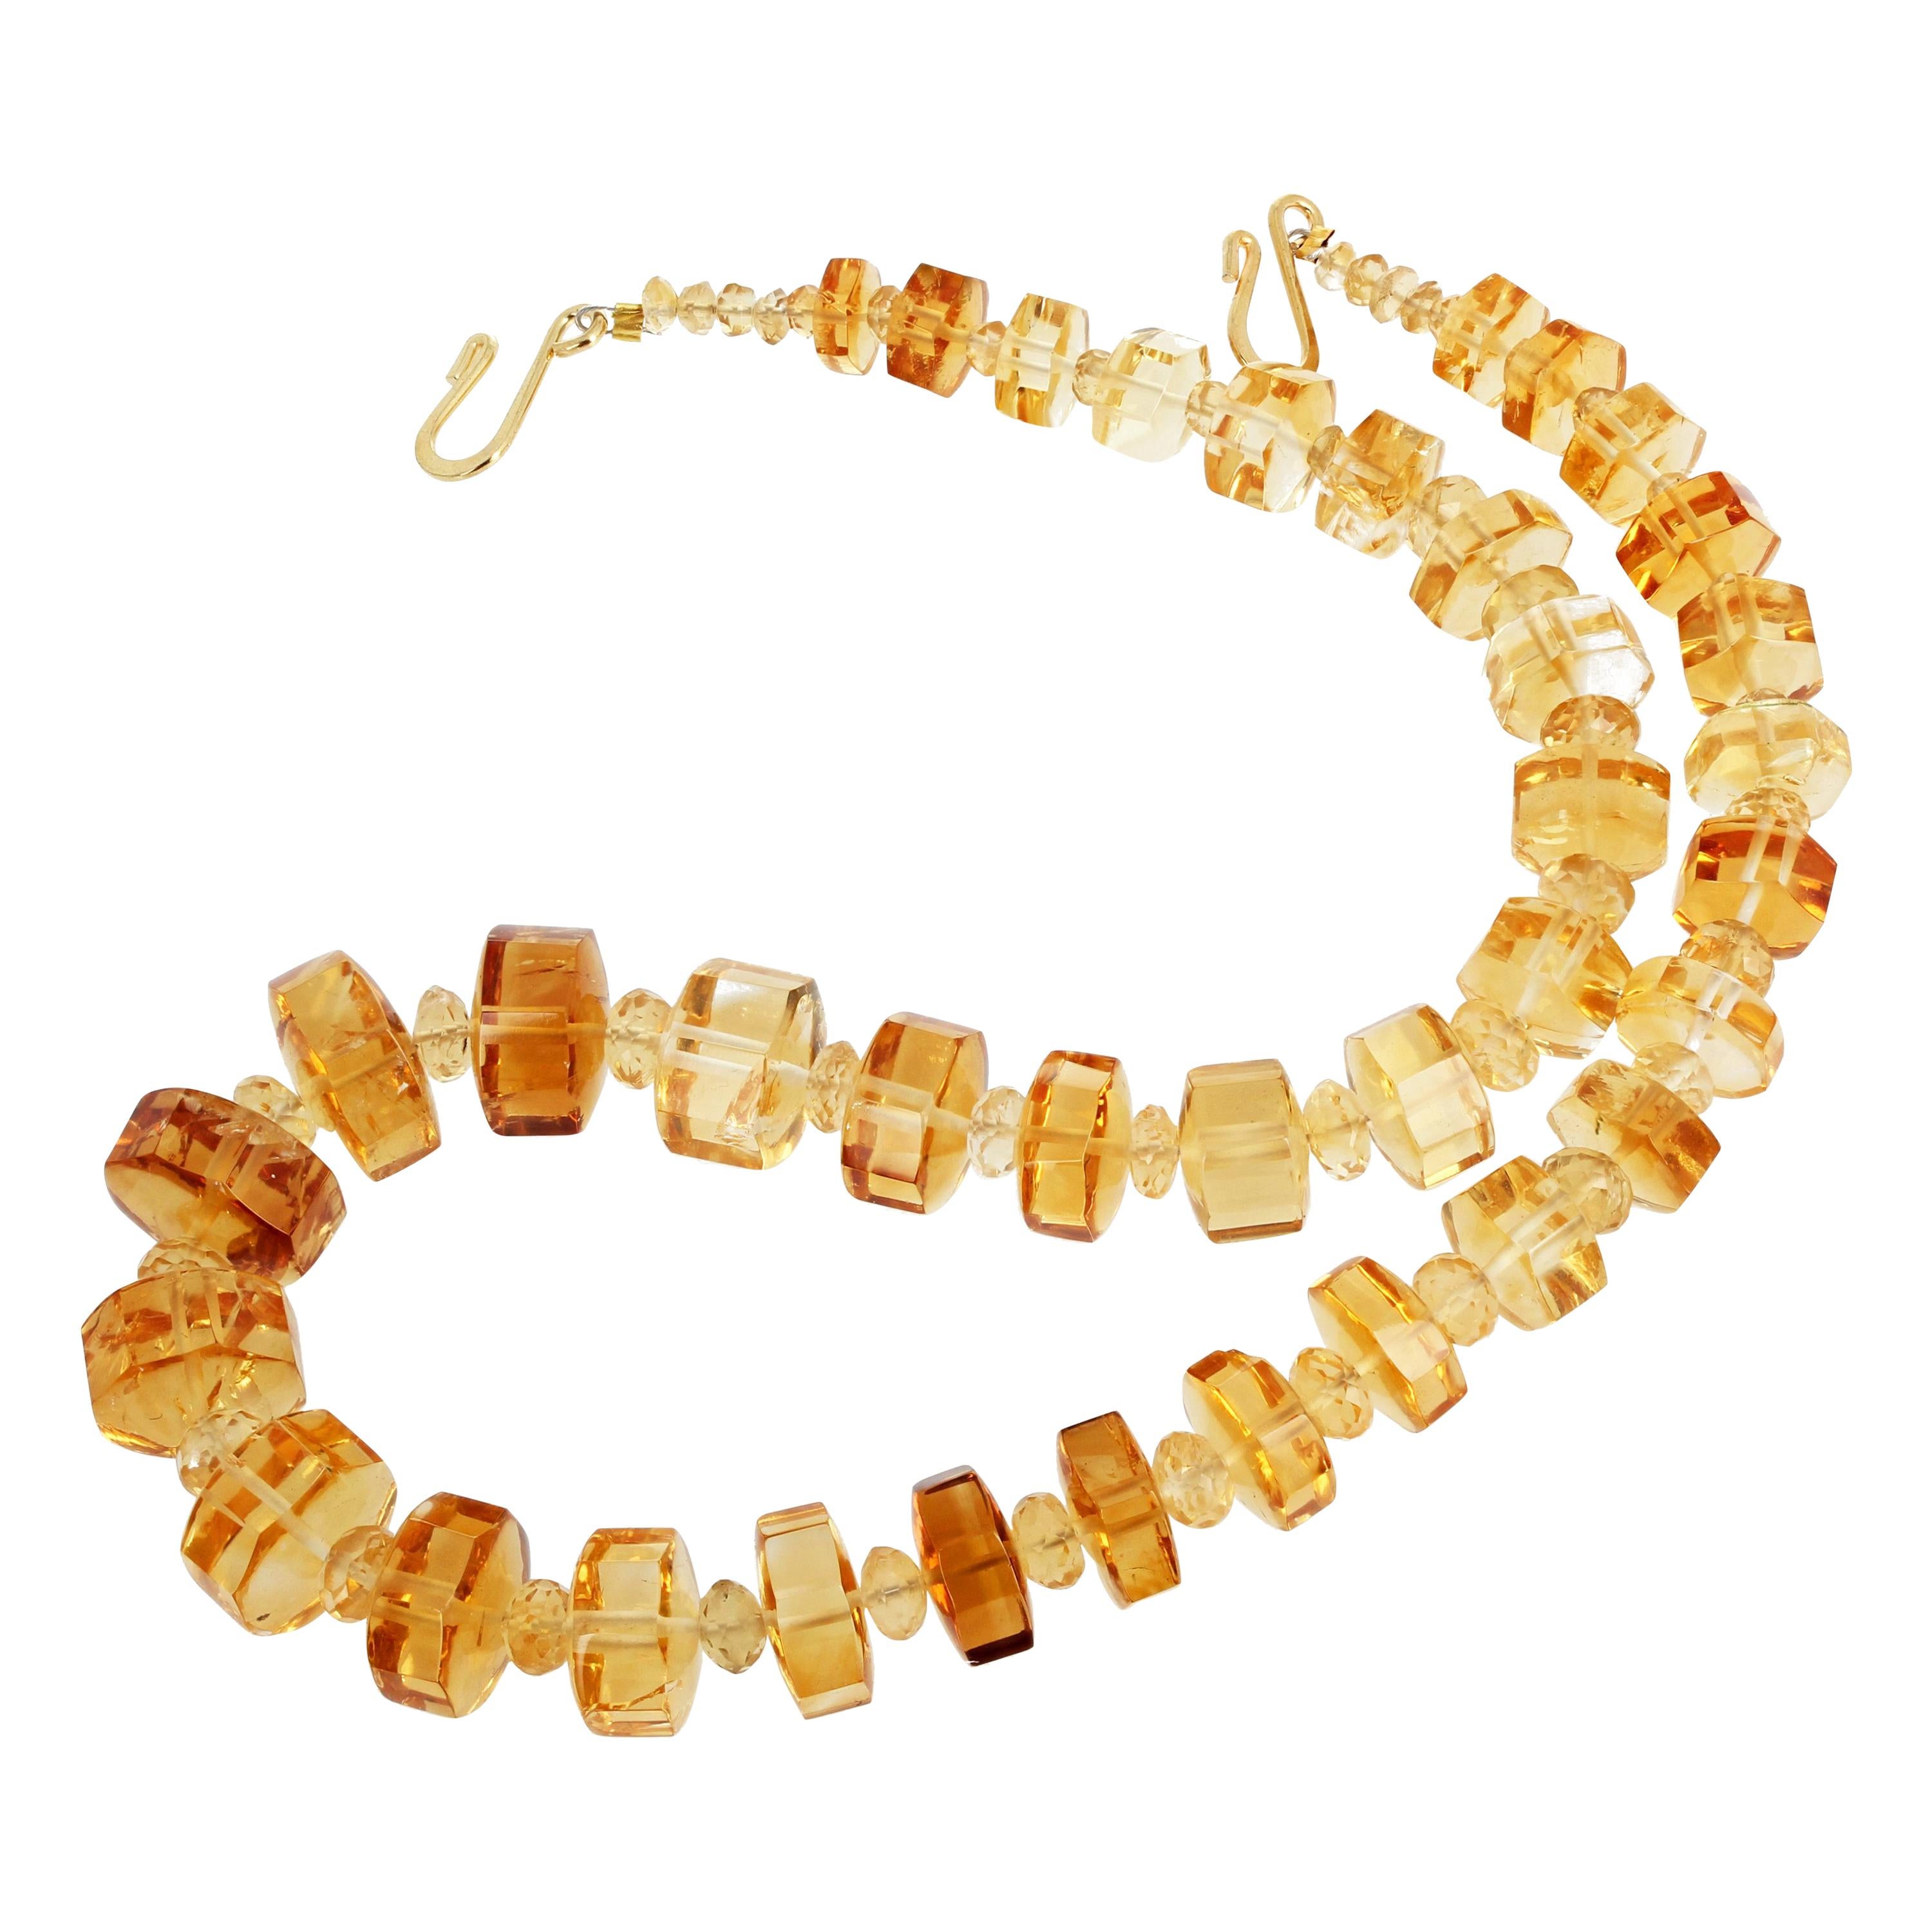 Glittering crazy cut - 6 sided - Citrines (the largest approximately 15 mm) enhanced with smaller faceted sparkling Citrines in a necklace 17 inches long with a gold tone hook clasp. 